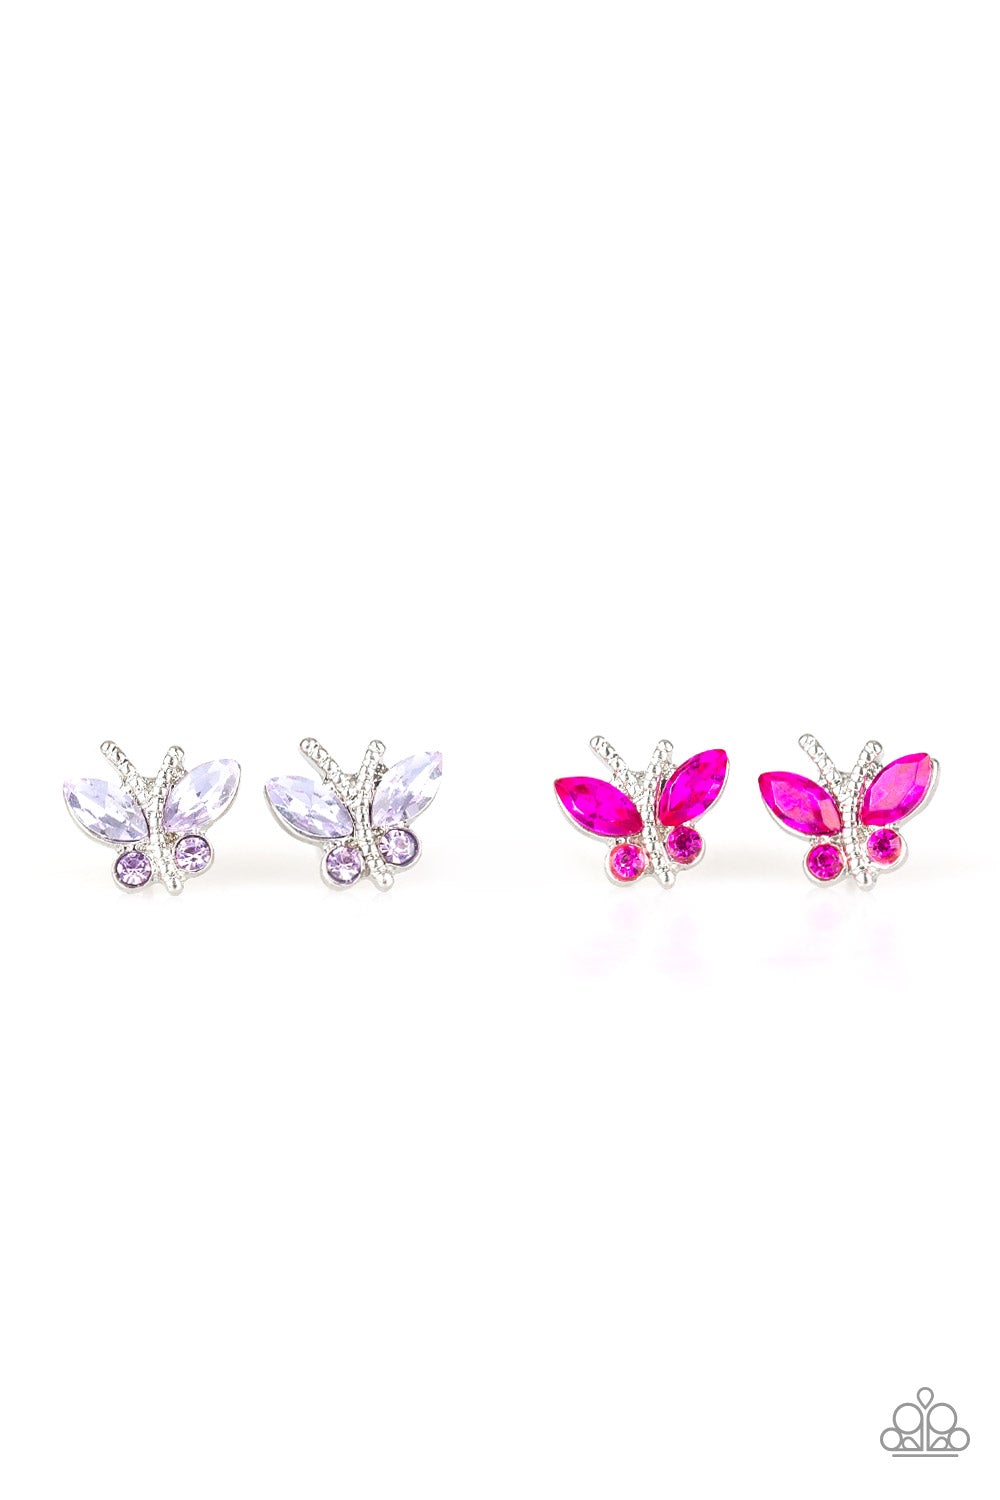 Paparazzi Accessories - RHINESTONE BUTTERFLY #SS14 - Starlet Shimmer Earrings